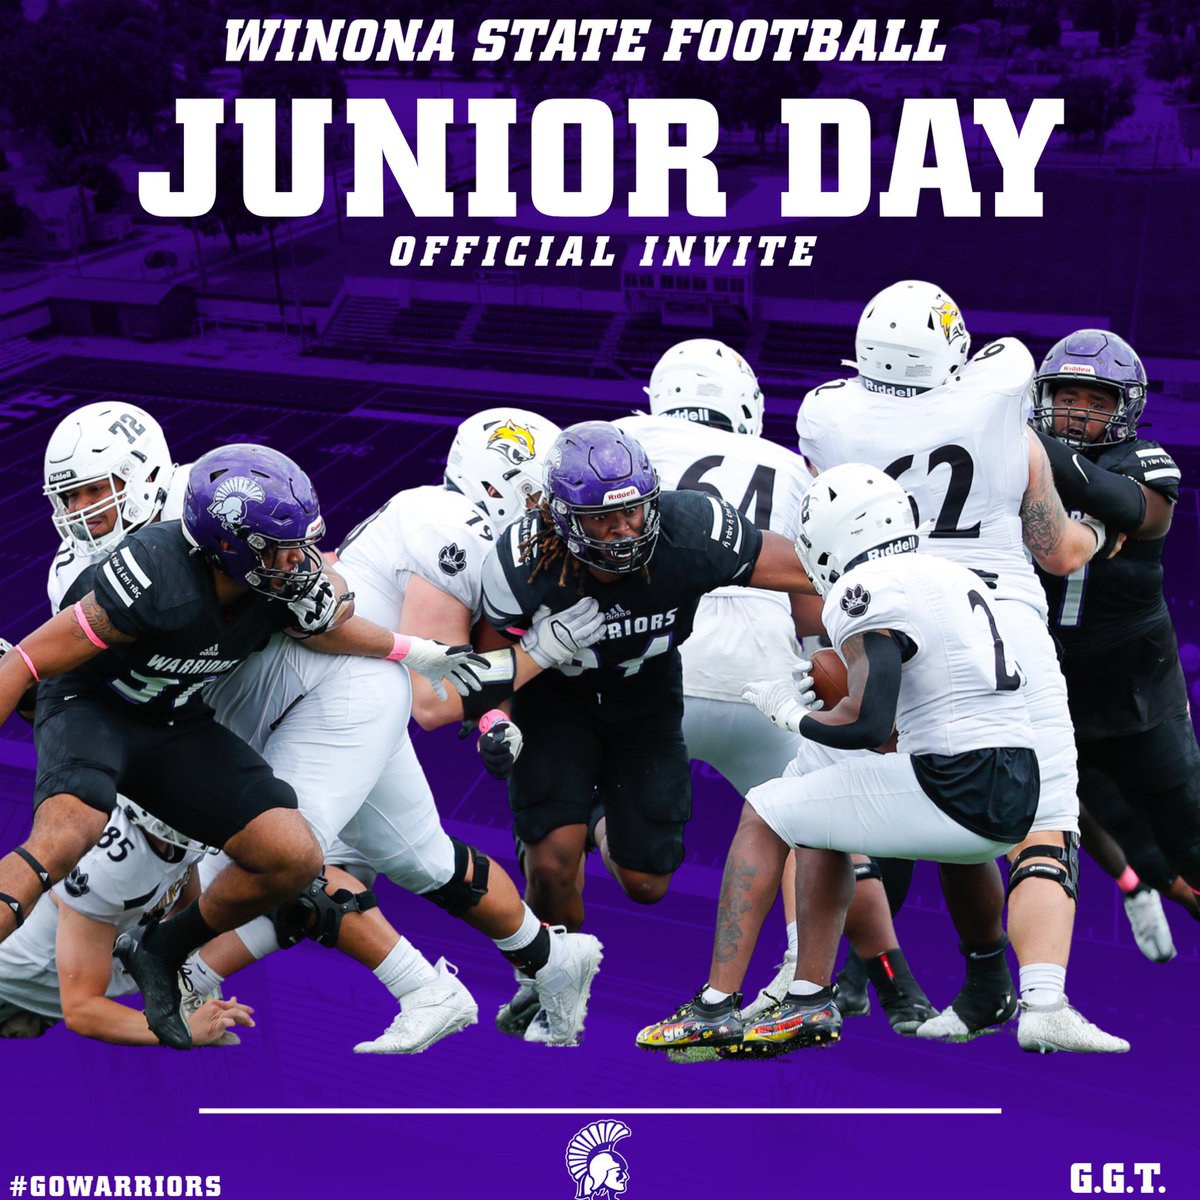 Thank you @Coach_Spencer11 for the junior day invite! @WinonaState_FB @HUHS_Football